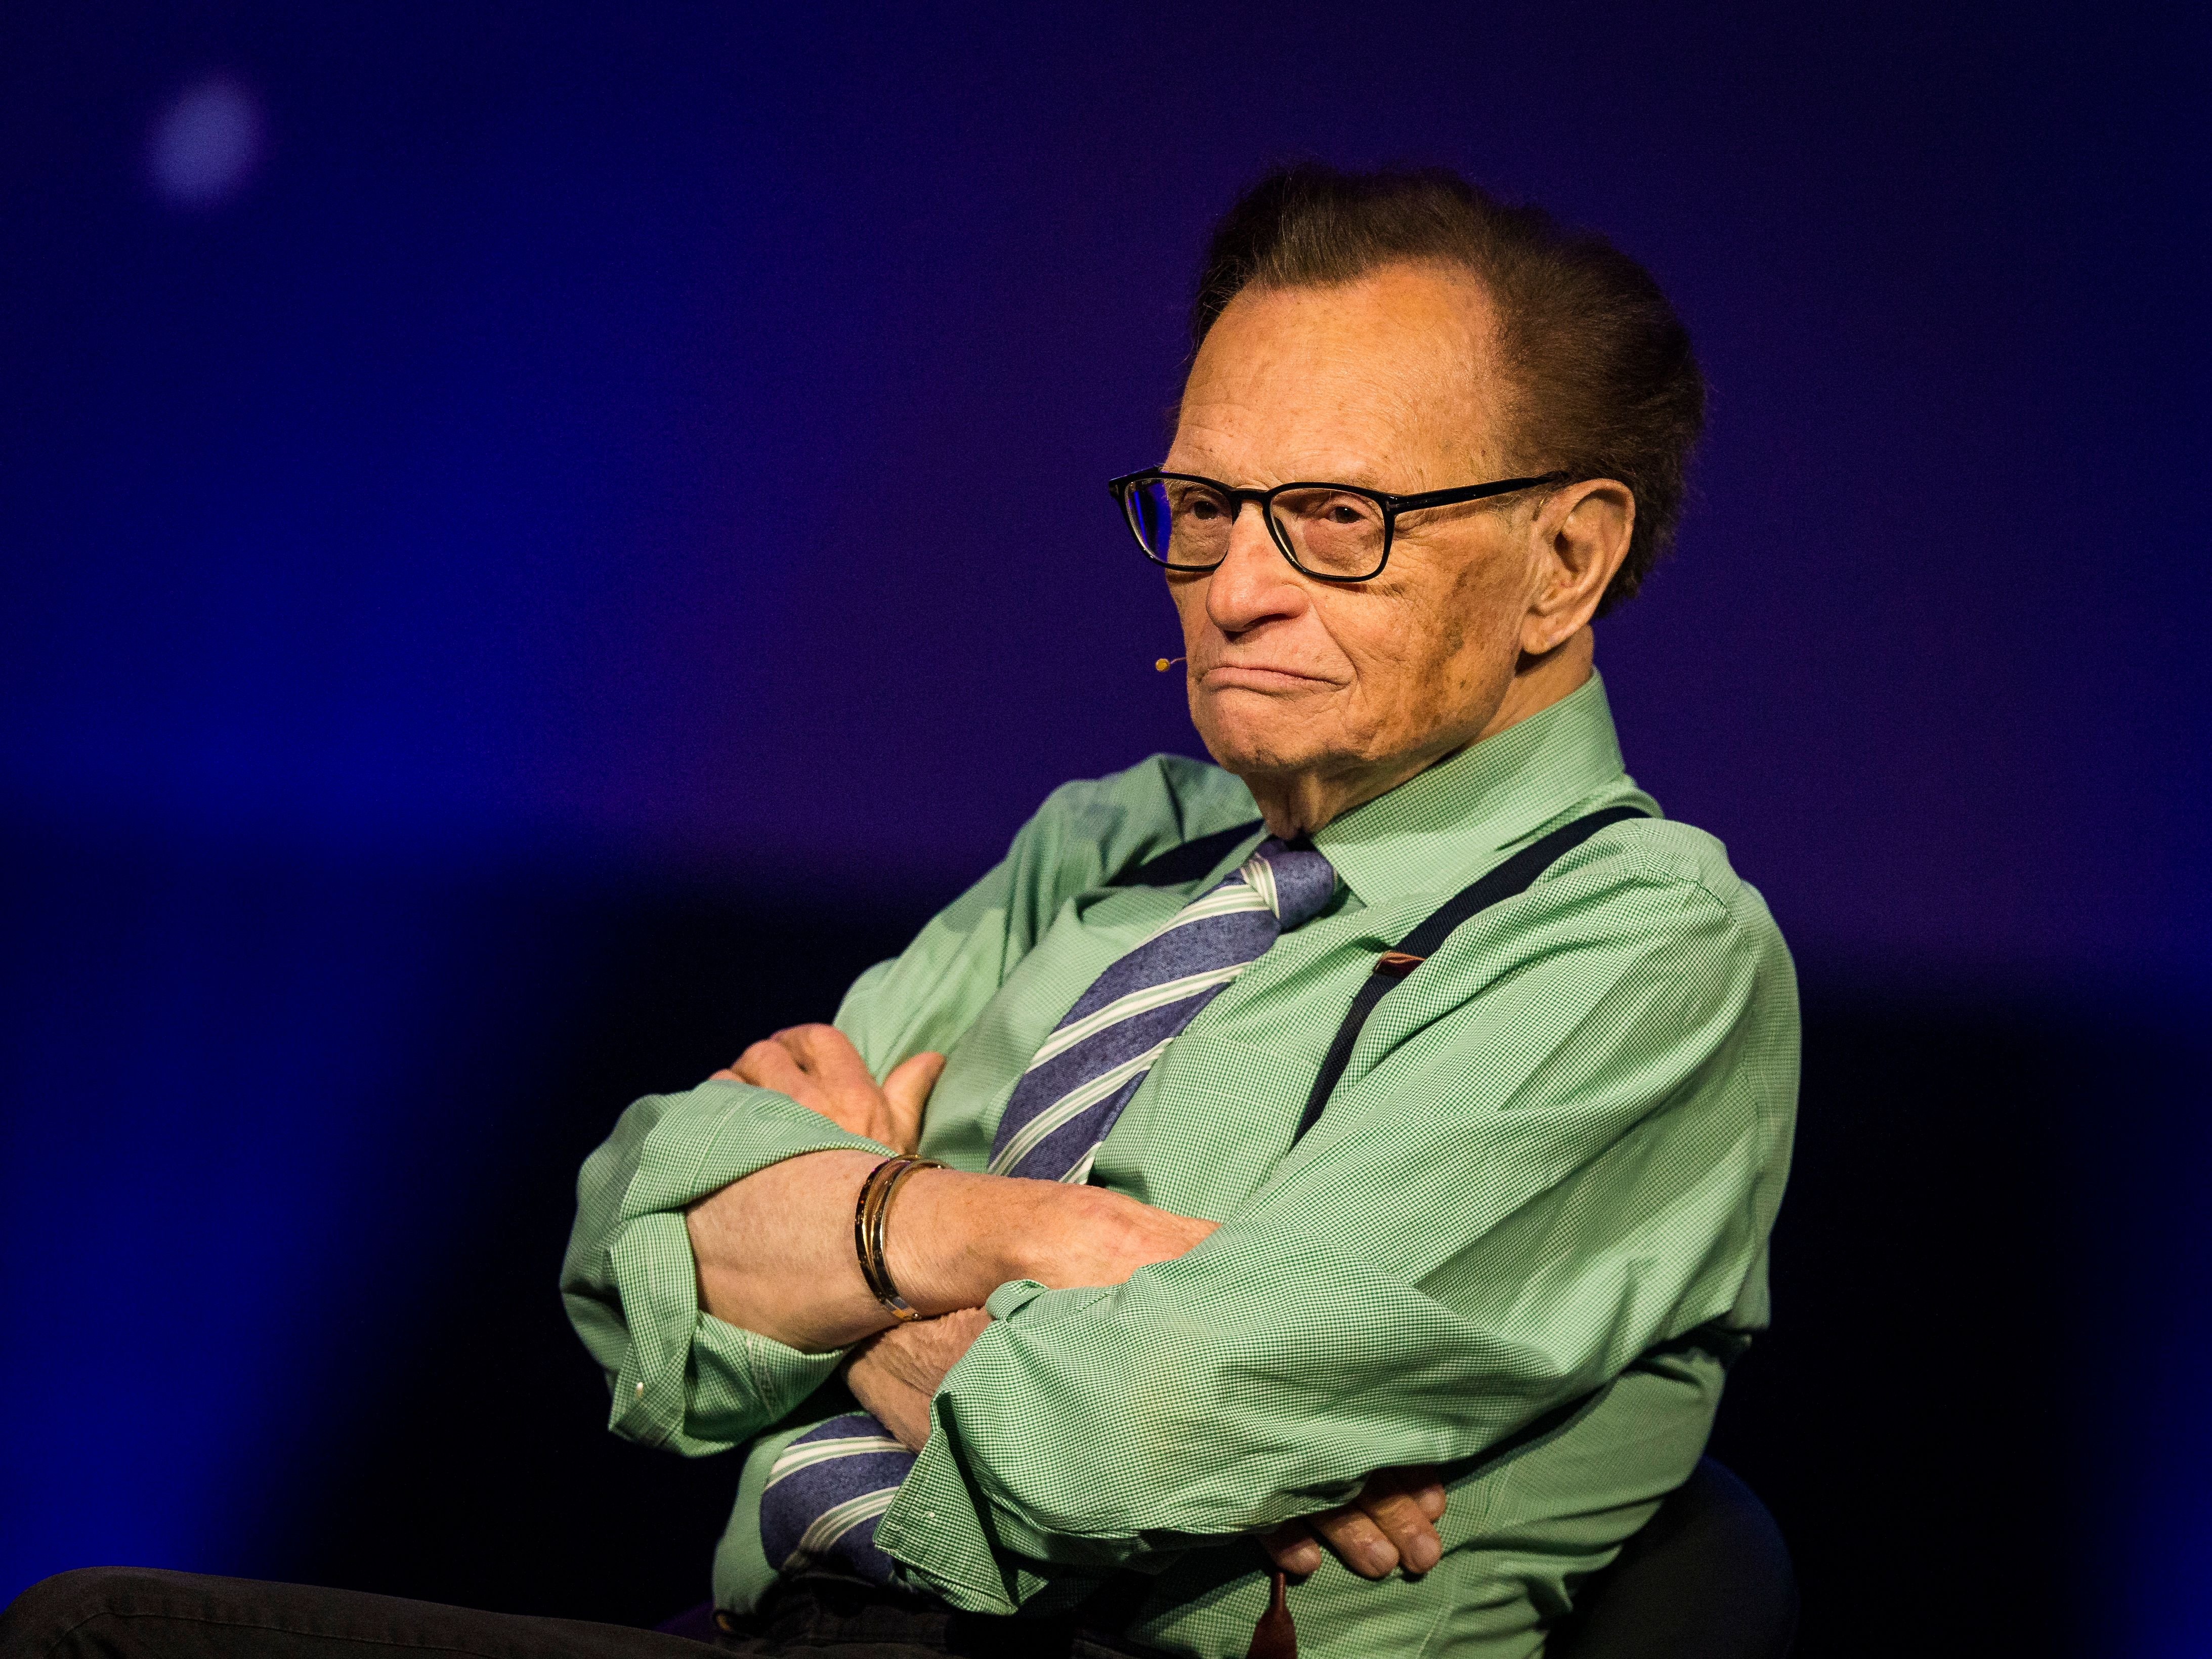 Larry King at the Starmus Festival on June 21, 2017 | Photo: Getty Images